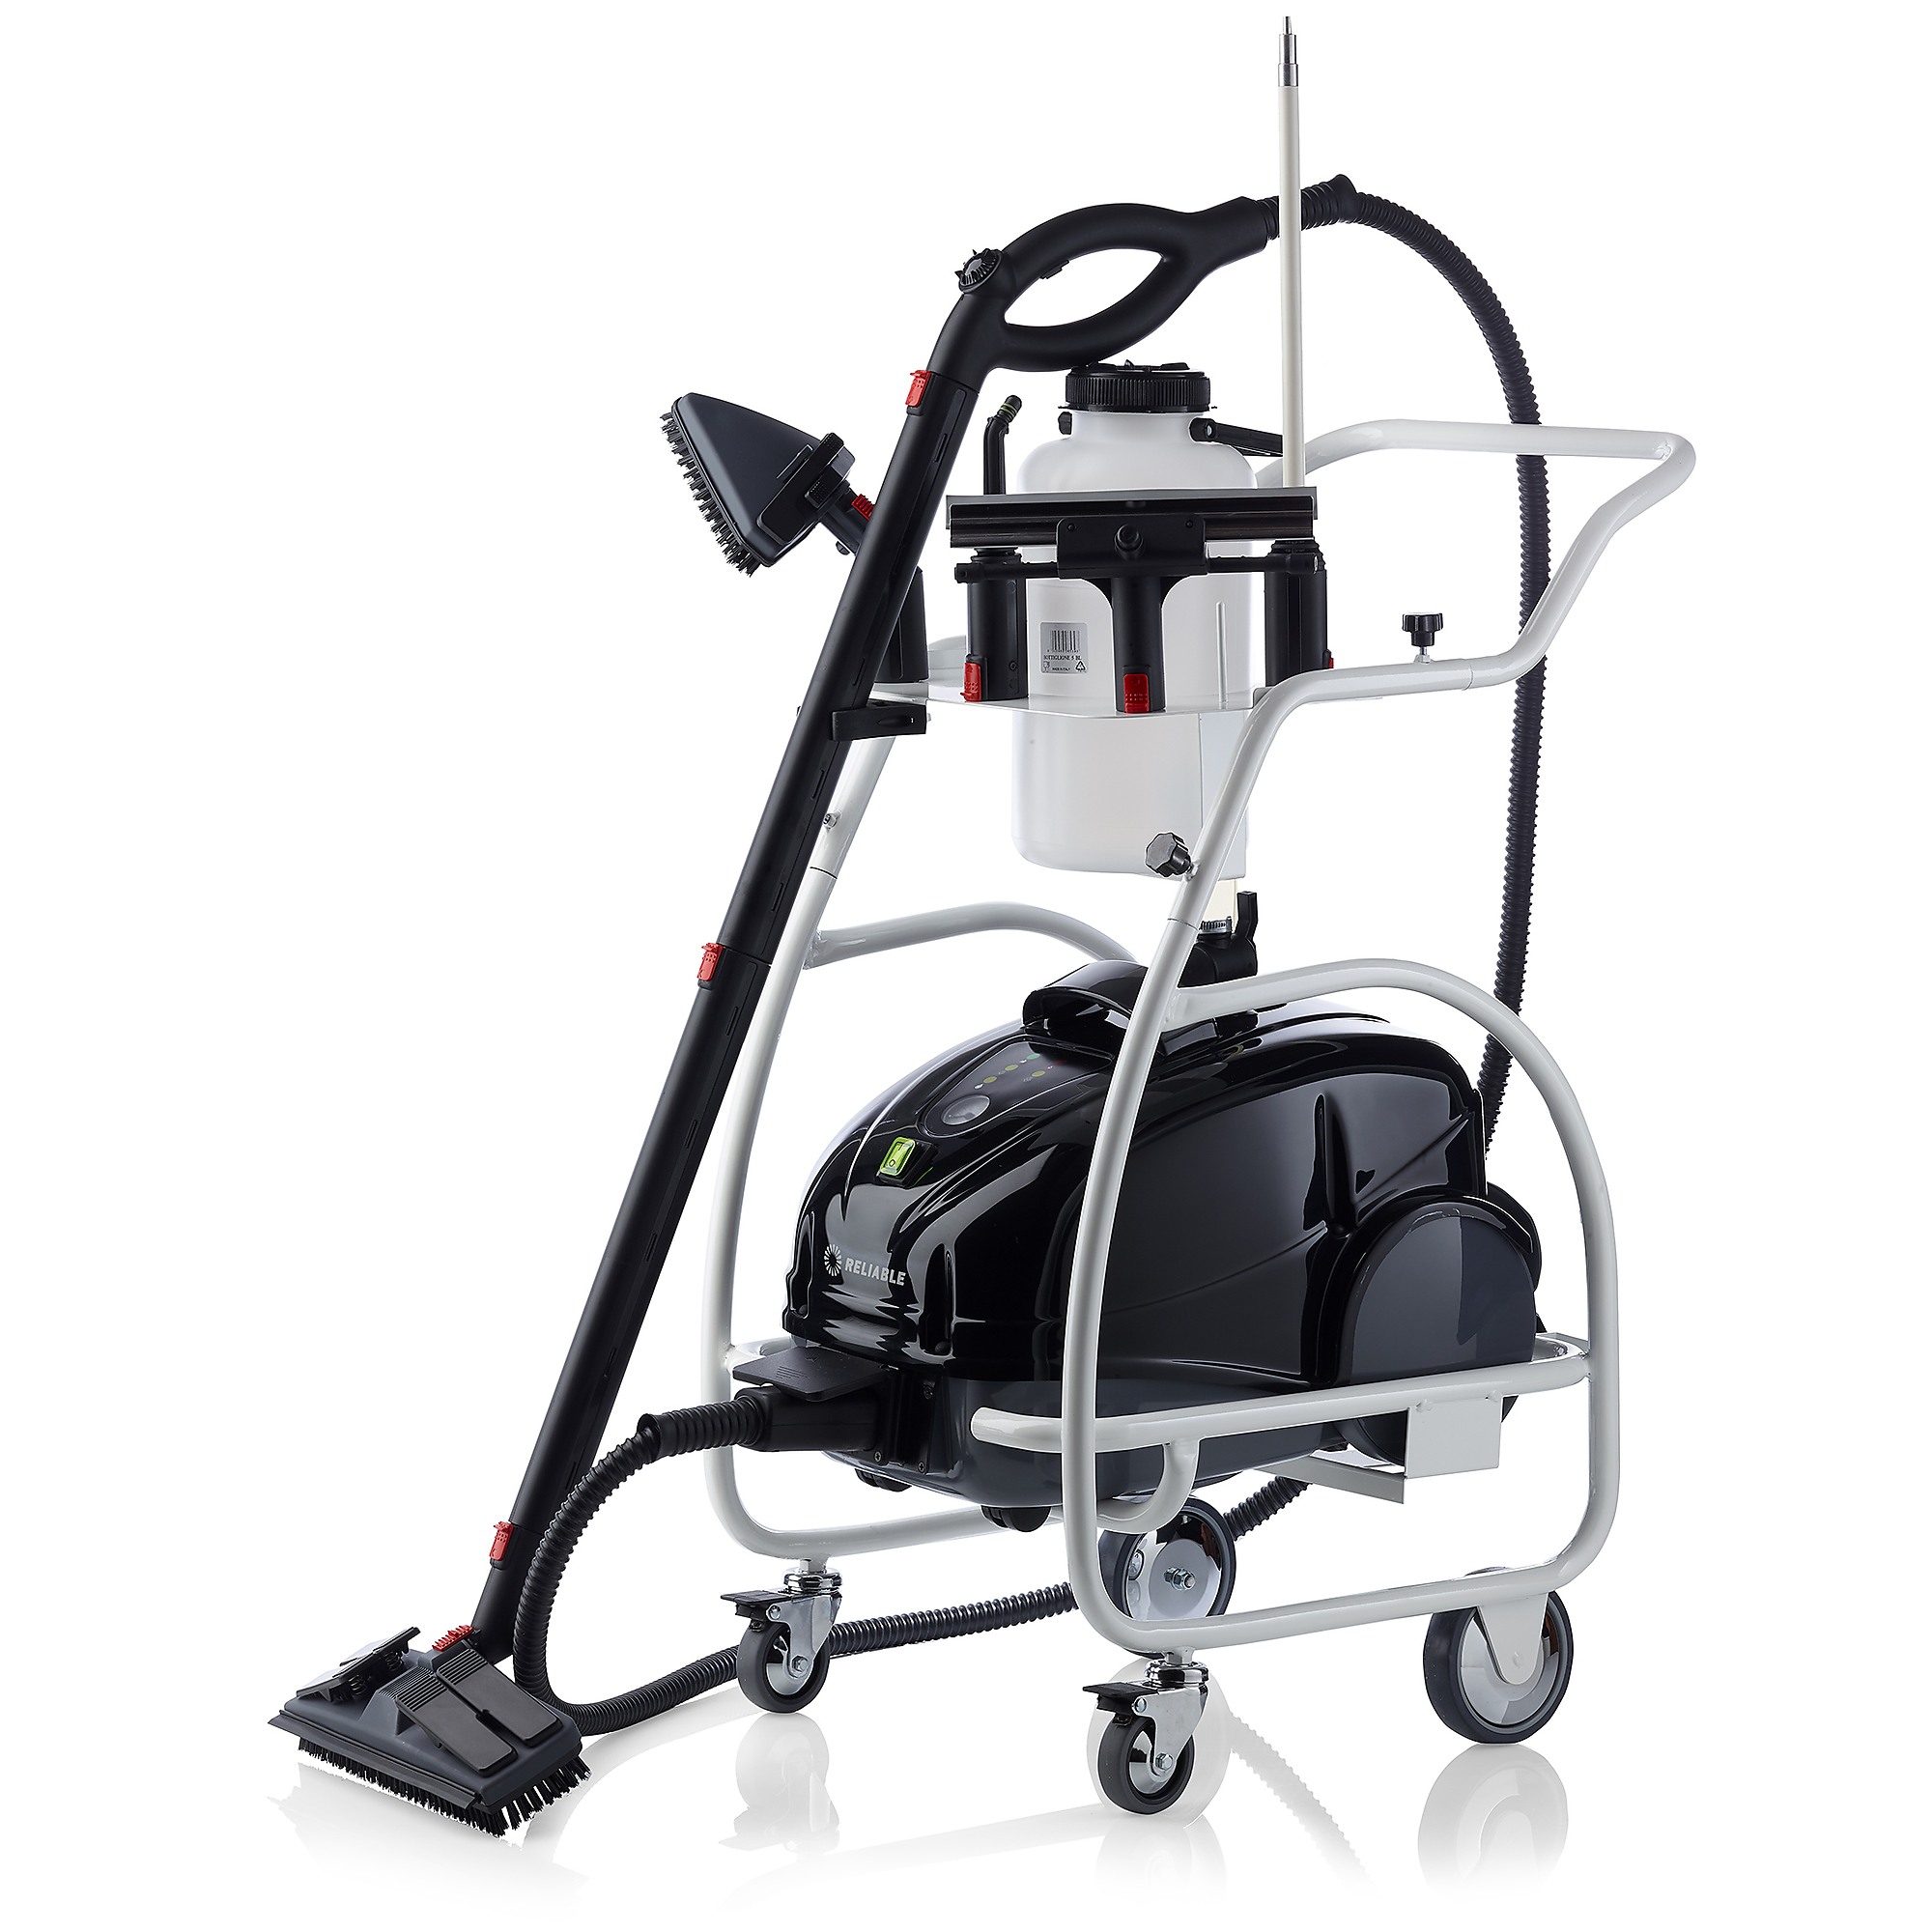 Reliable, Brio Pro Cleaner With Trolley, Capacity 1.32 Gal, Max. Steam Pressure 87 PSI, Model 1000CC/CT